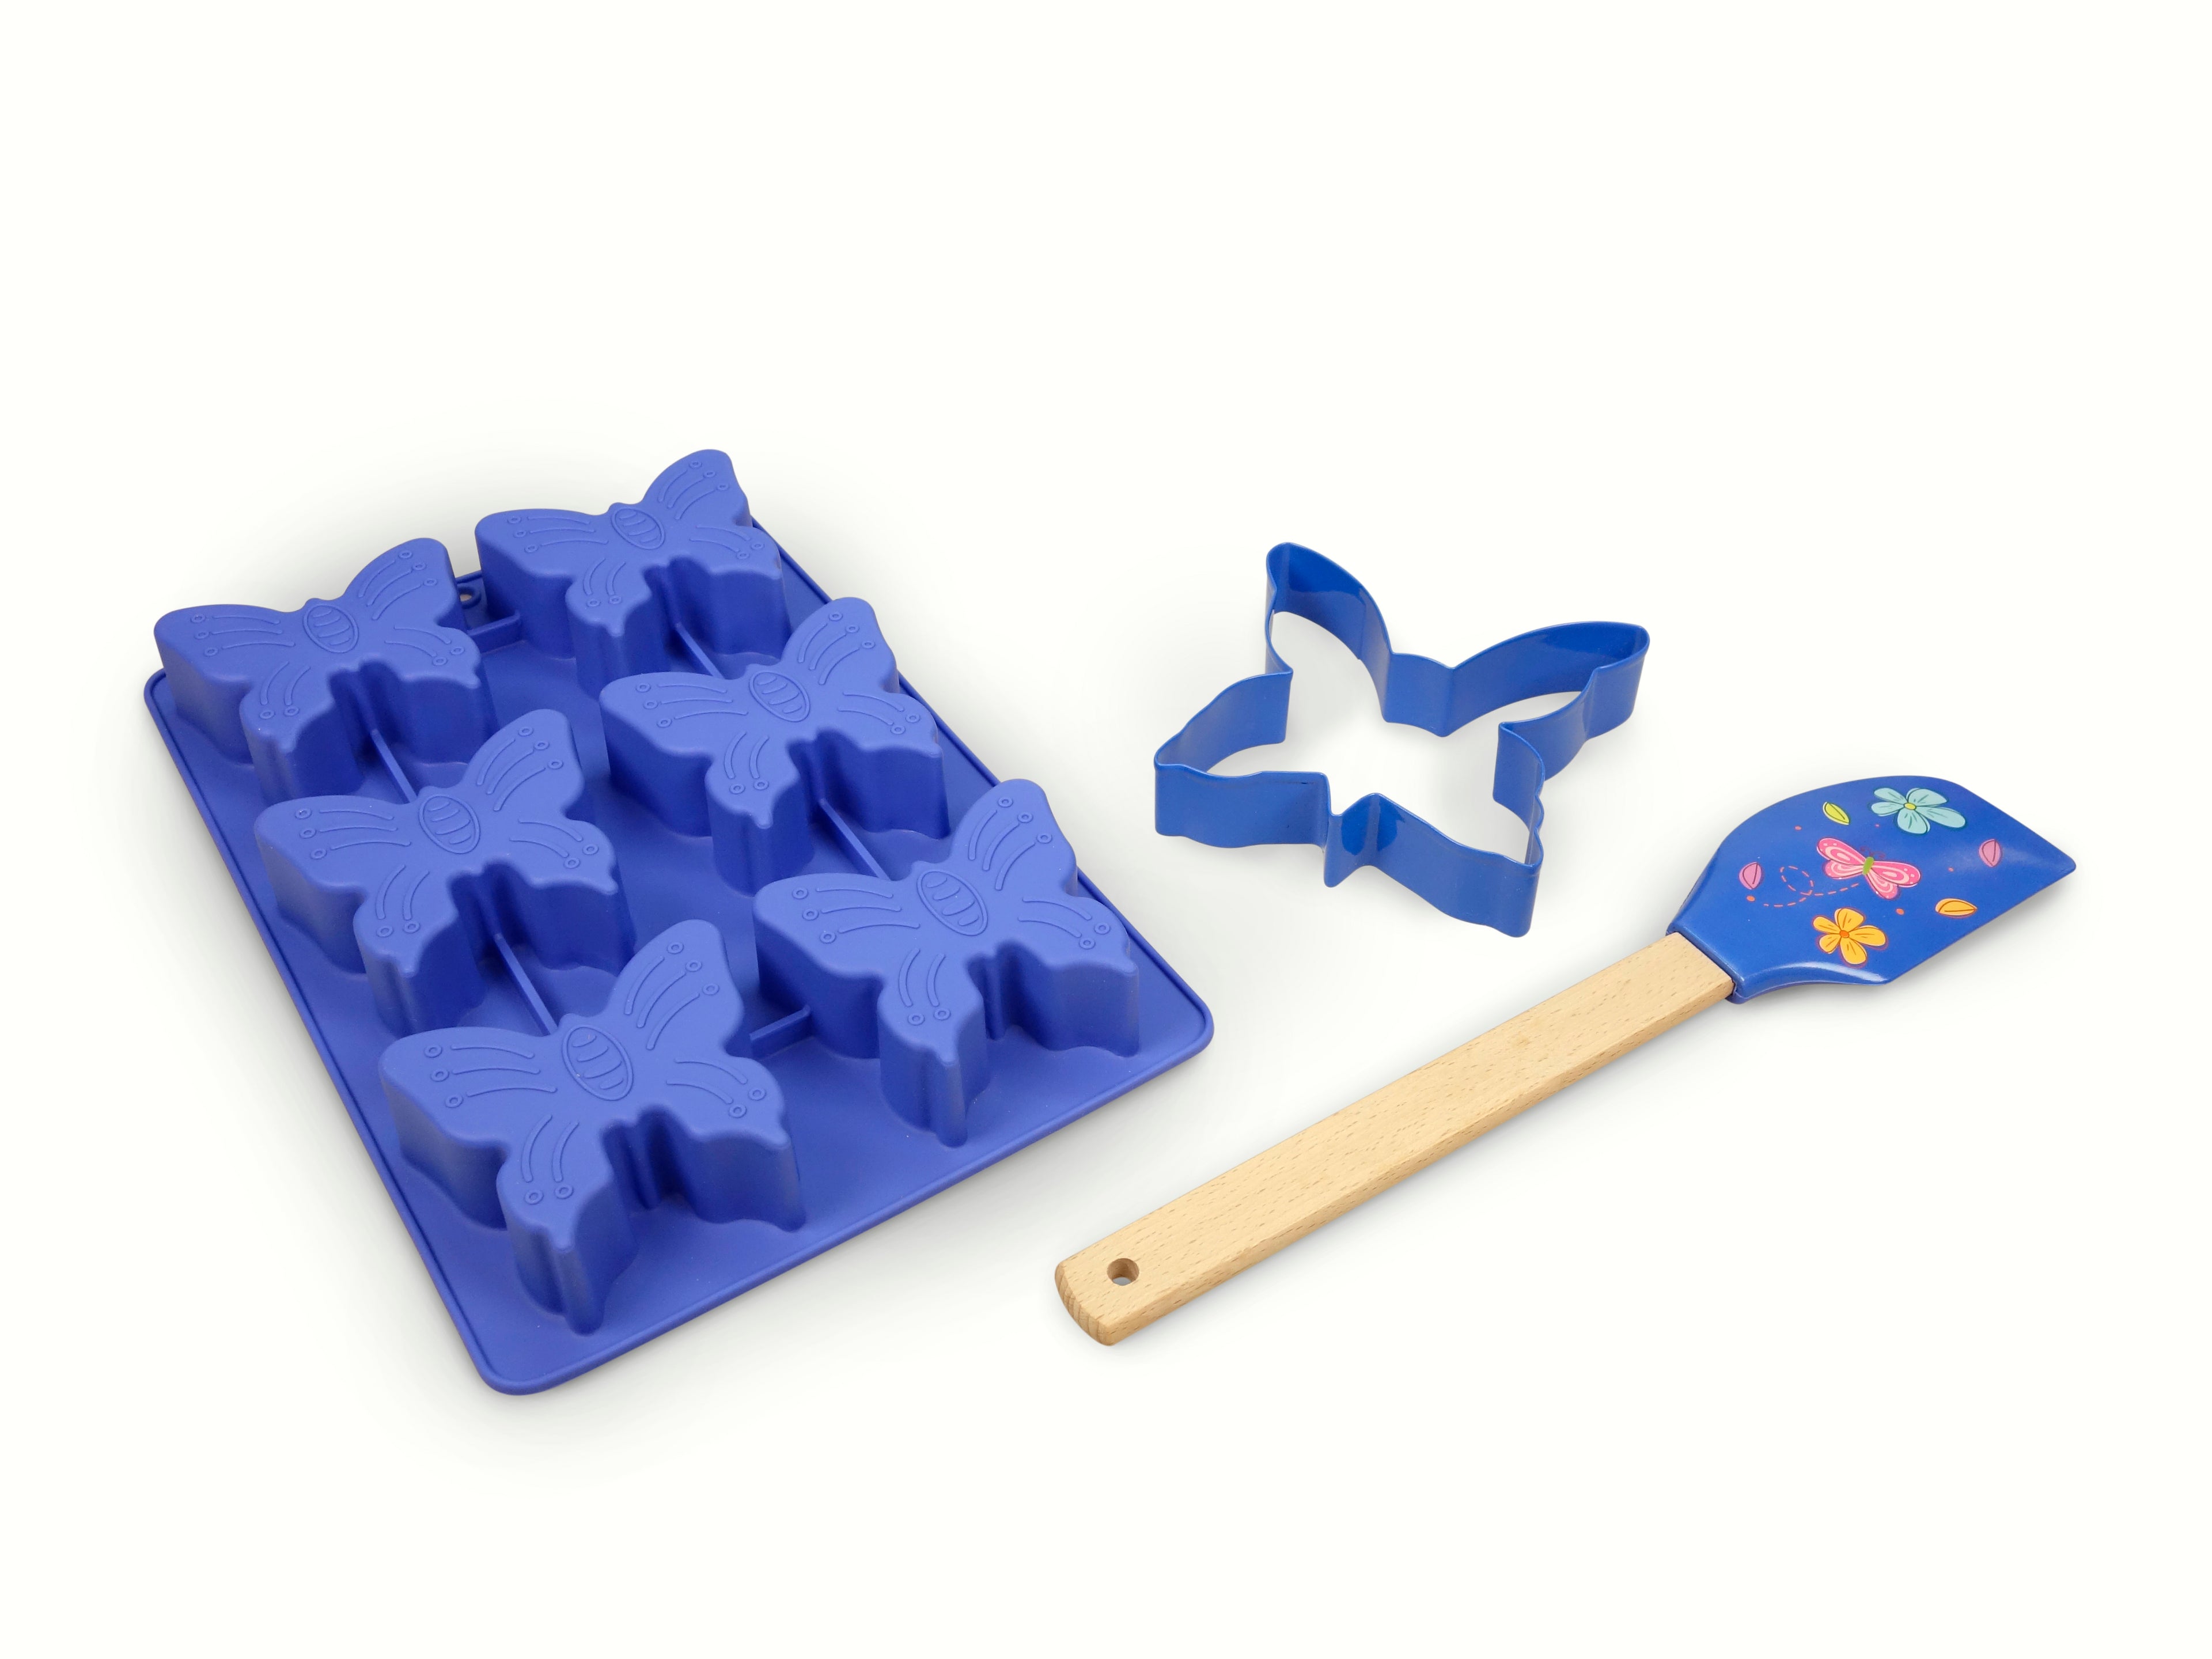 Out of box image of Spring Fling Butterfly Baking Set including 1 silicone cupcake mold with 6 butterfly shapes, 1 butterfly stainless steel cookie cutter, 1 silicone butterfly print spatula and recipes.